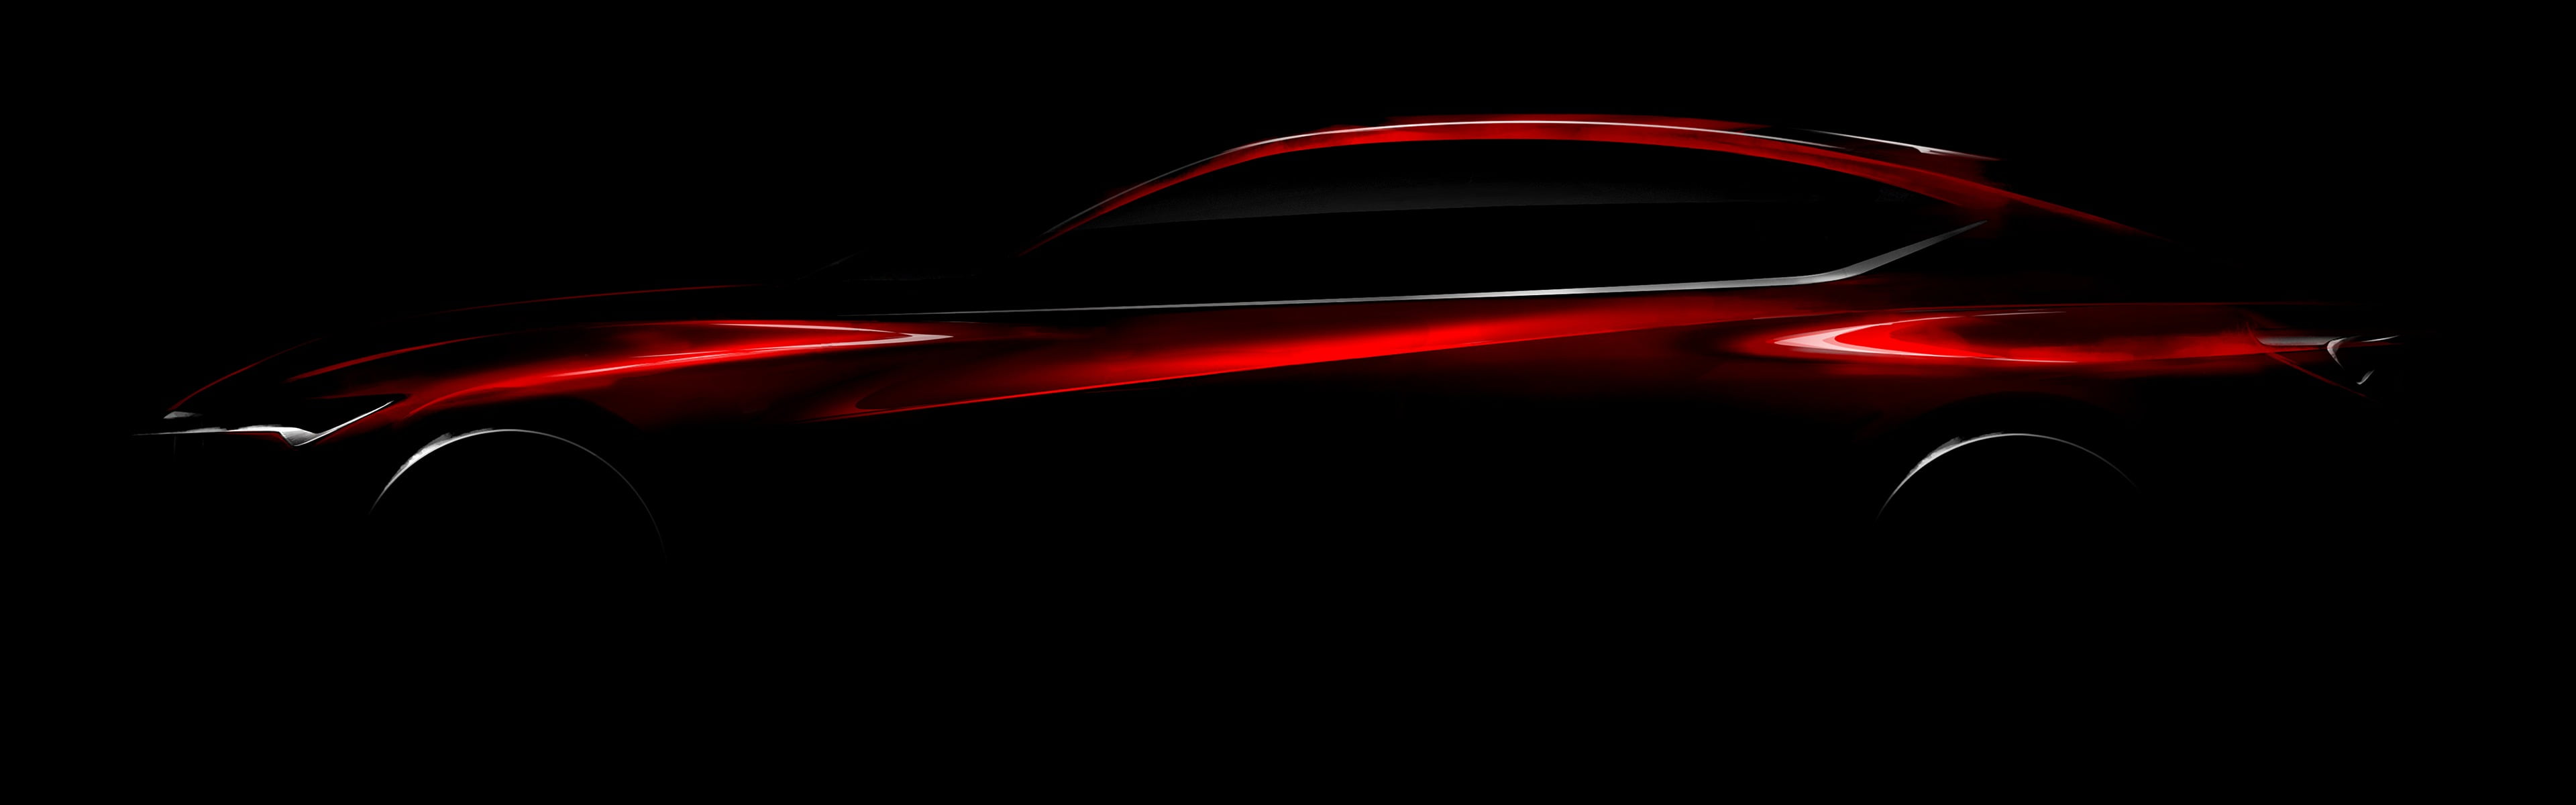 red coupe, Acura Precision, car, vehicle, concept art, simple background